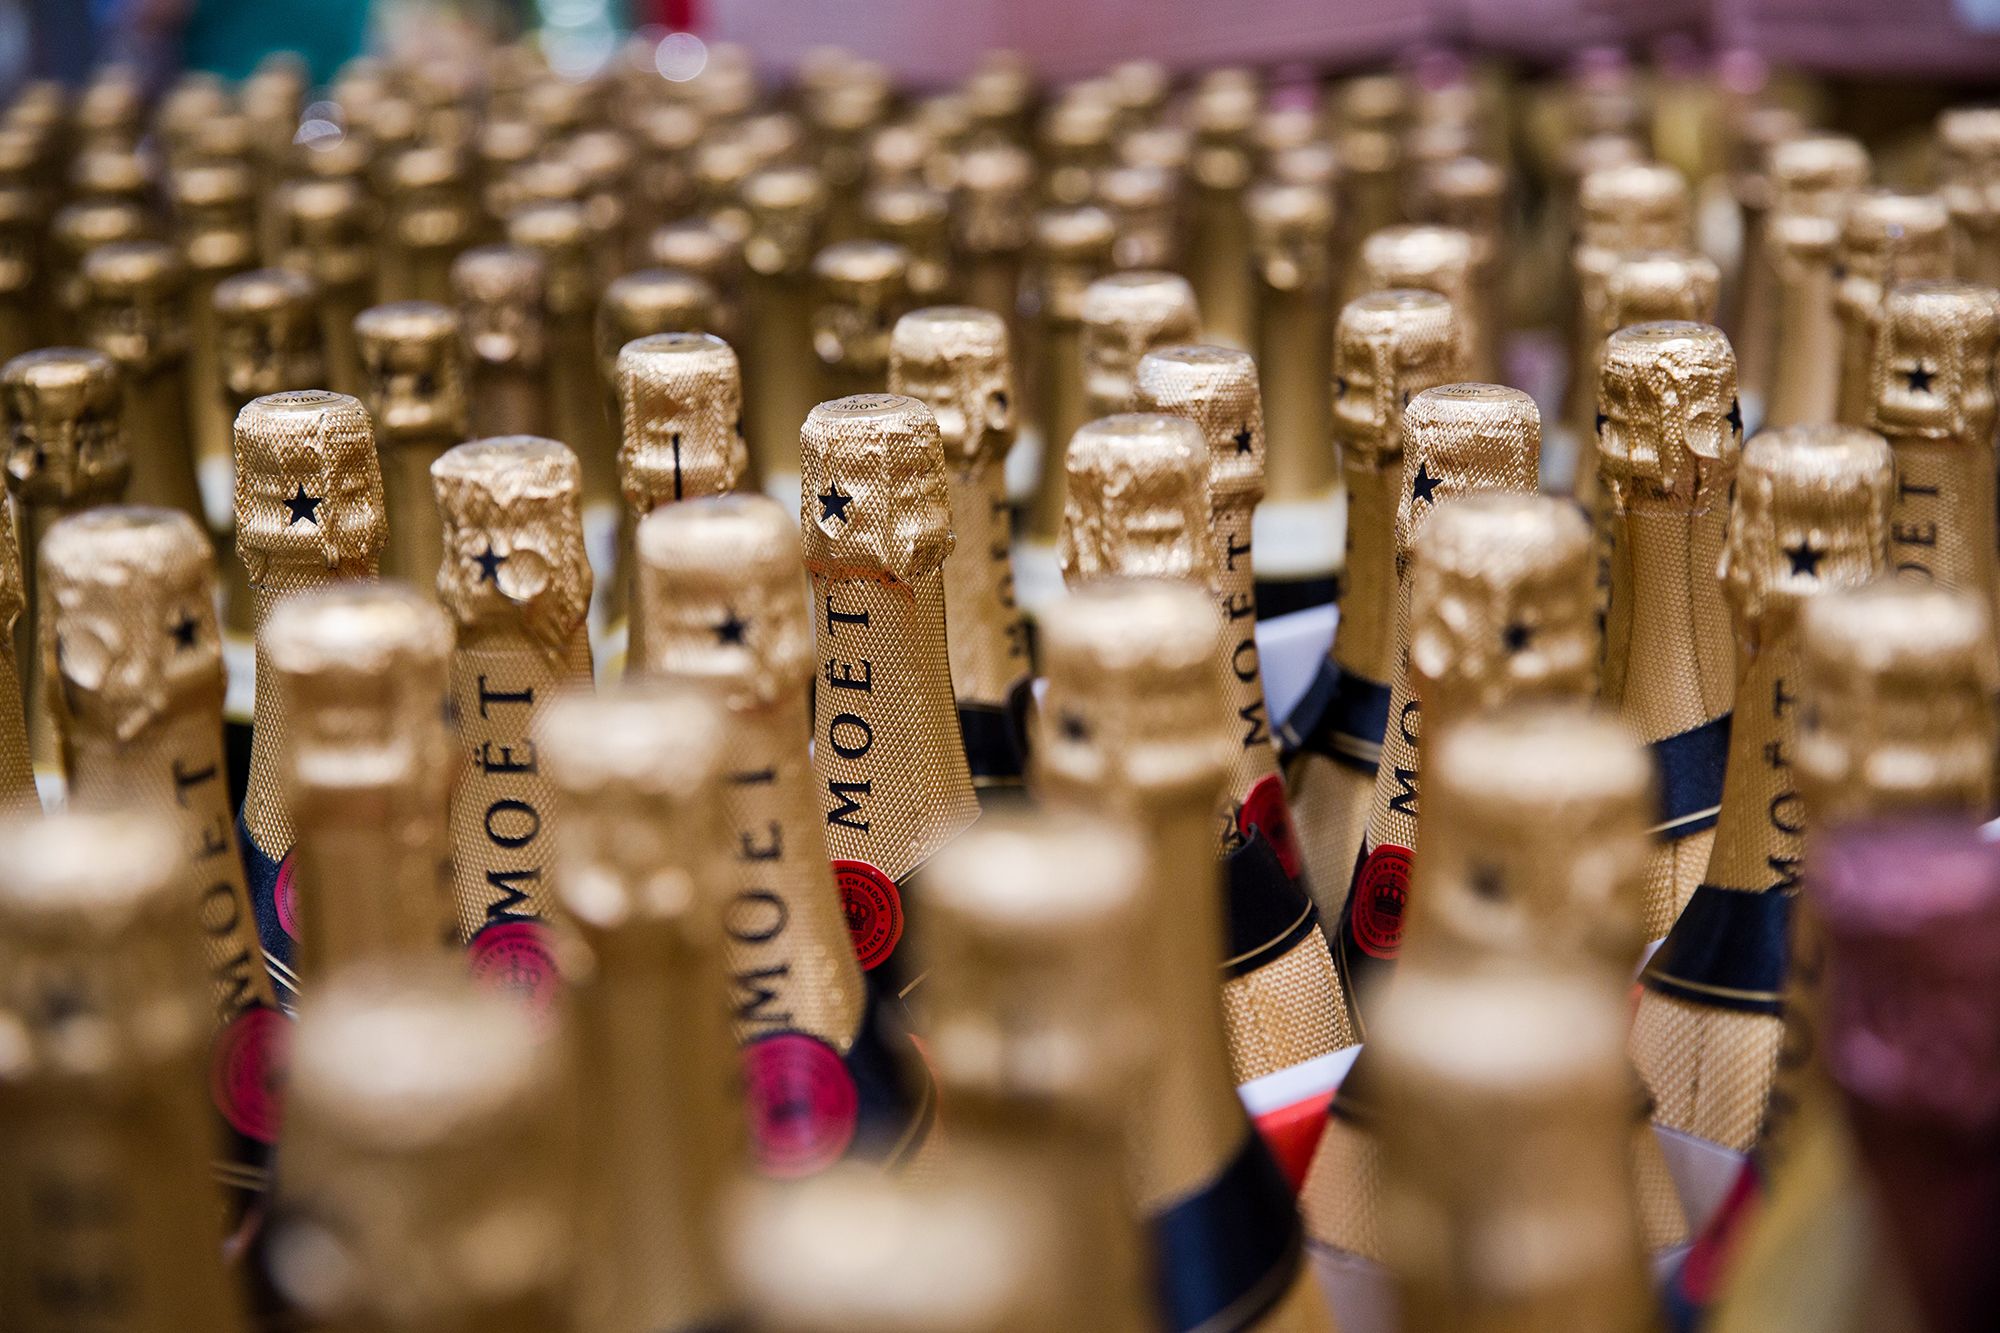 LVMH: Champagne in short supply - Decanter